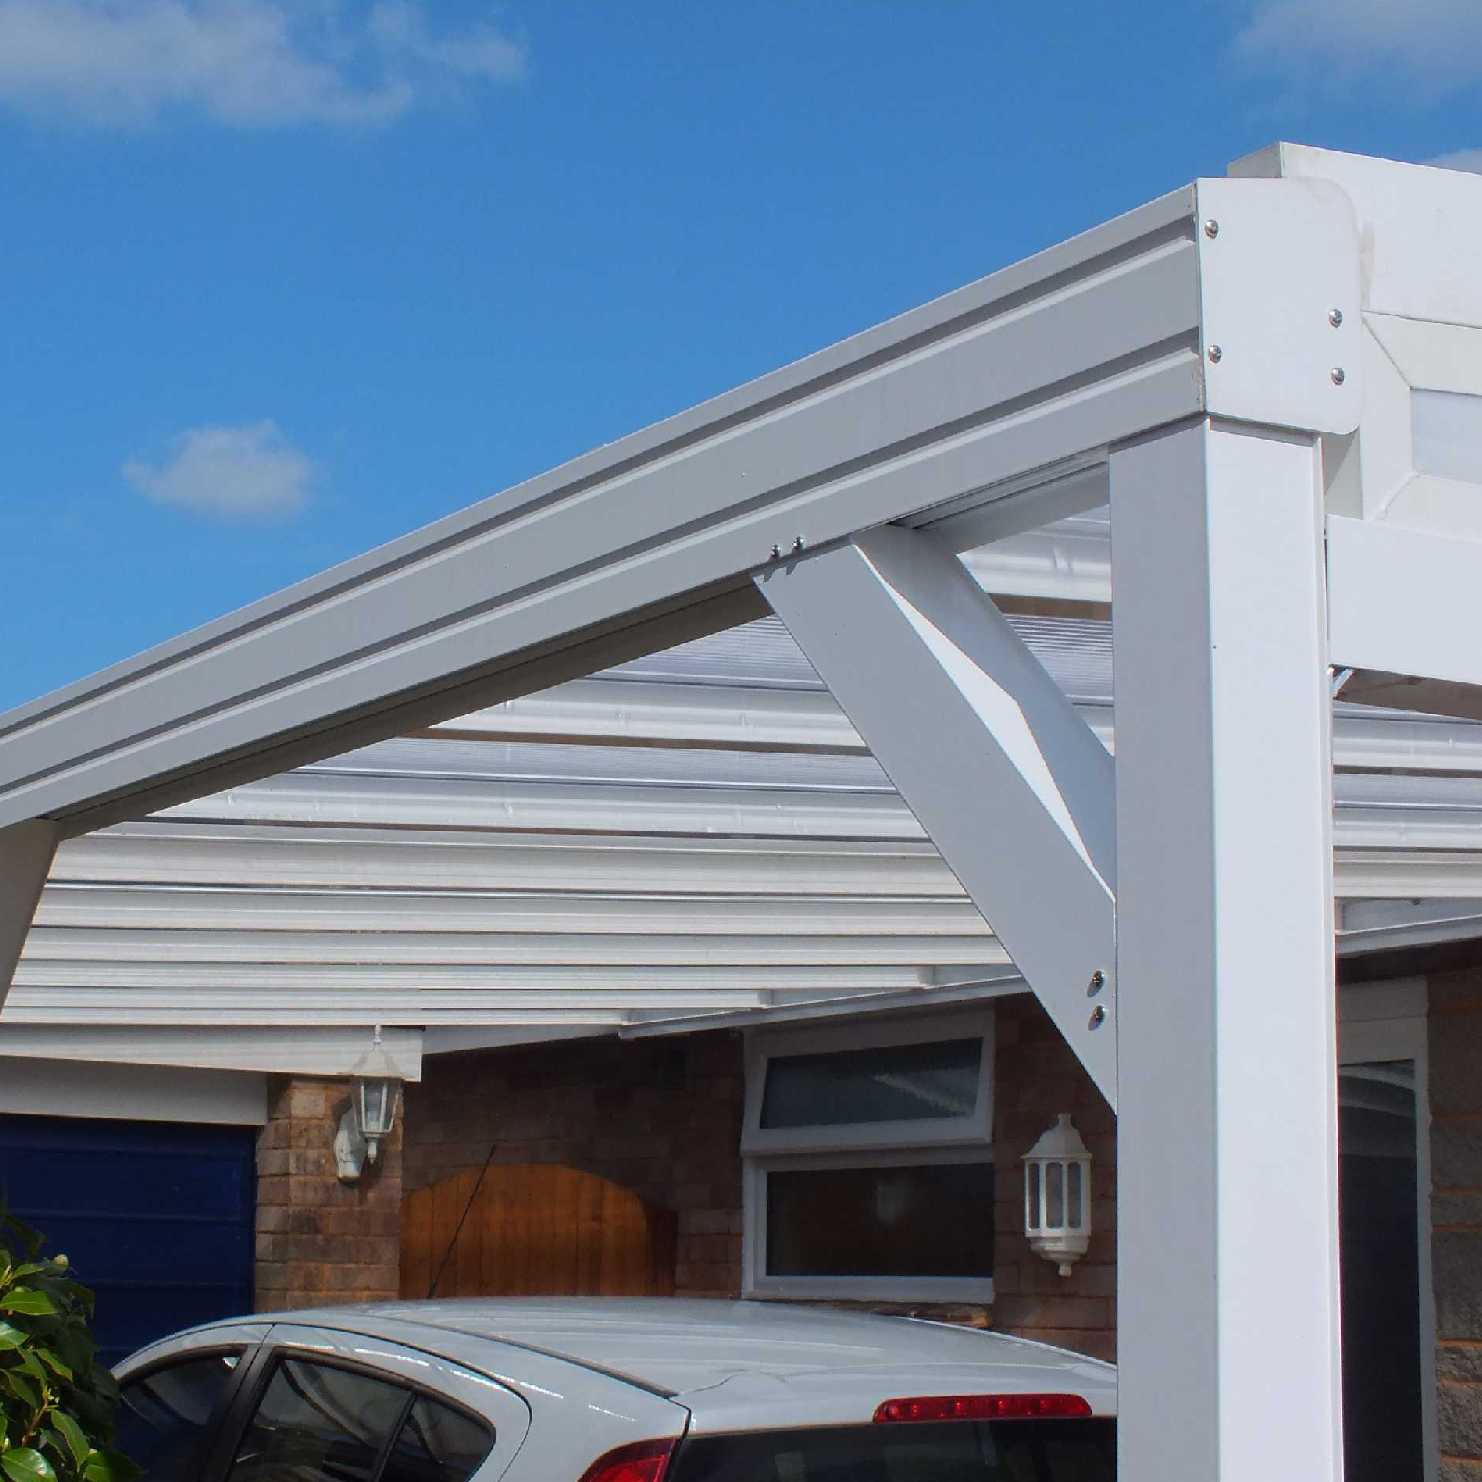 Buy Omega Smart Lean-To Canopy, White with 16mm Polycarbonate Glazing - 9.5m (W) x 1.5m (P), (5) Supporting Posts online today